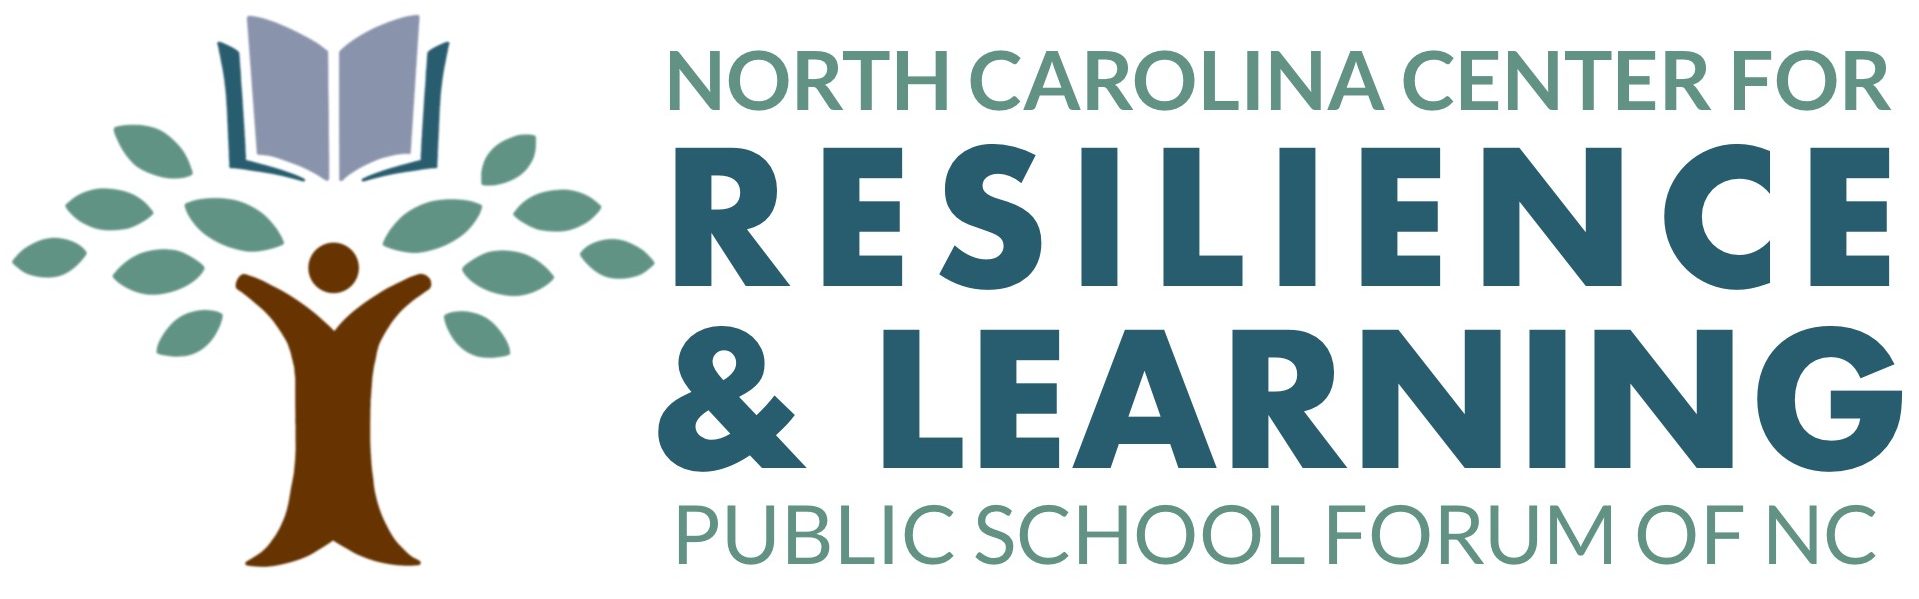 NC Center for Resilience & Learning